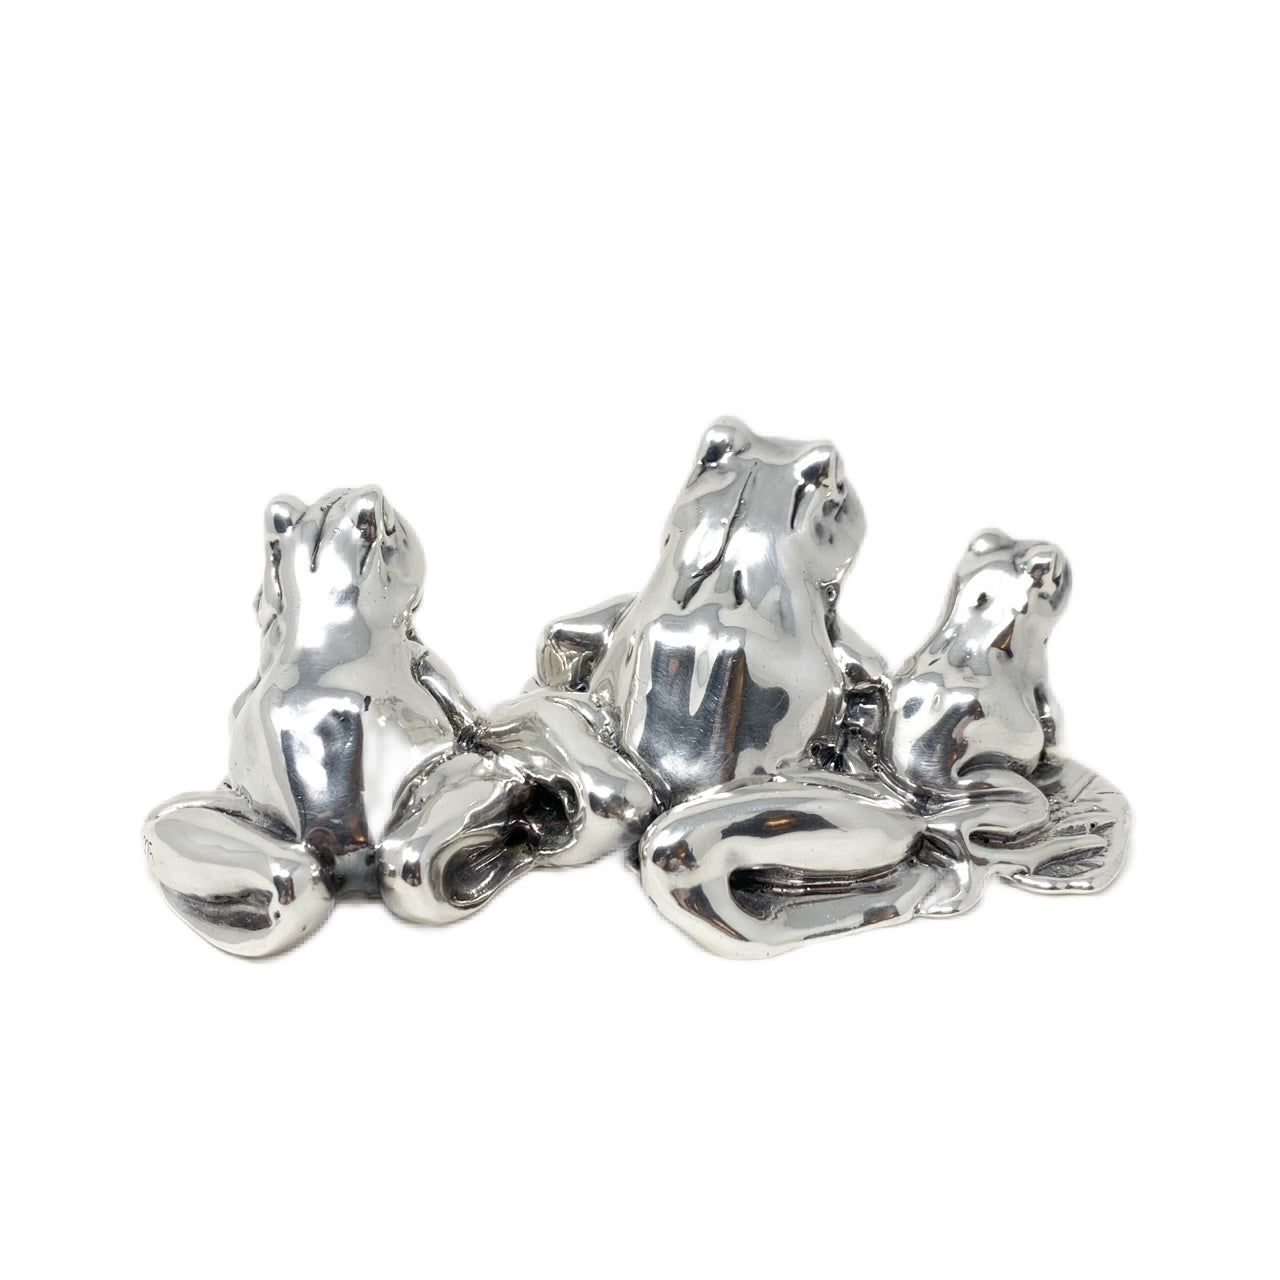 Vintage Sterling Silver Three Frogs Figurine